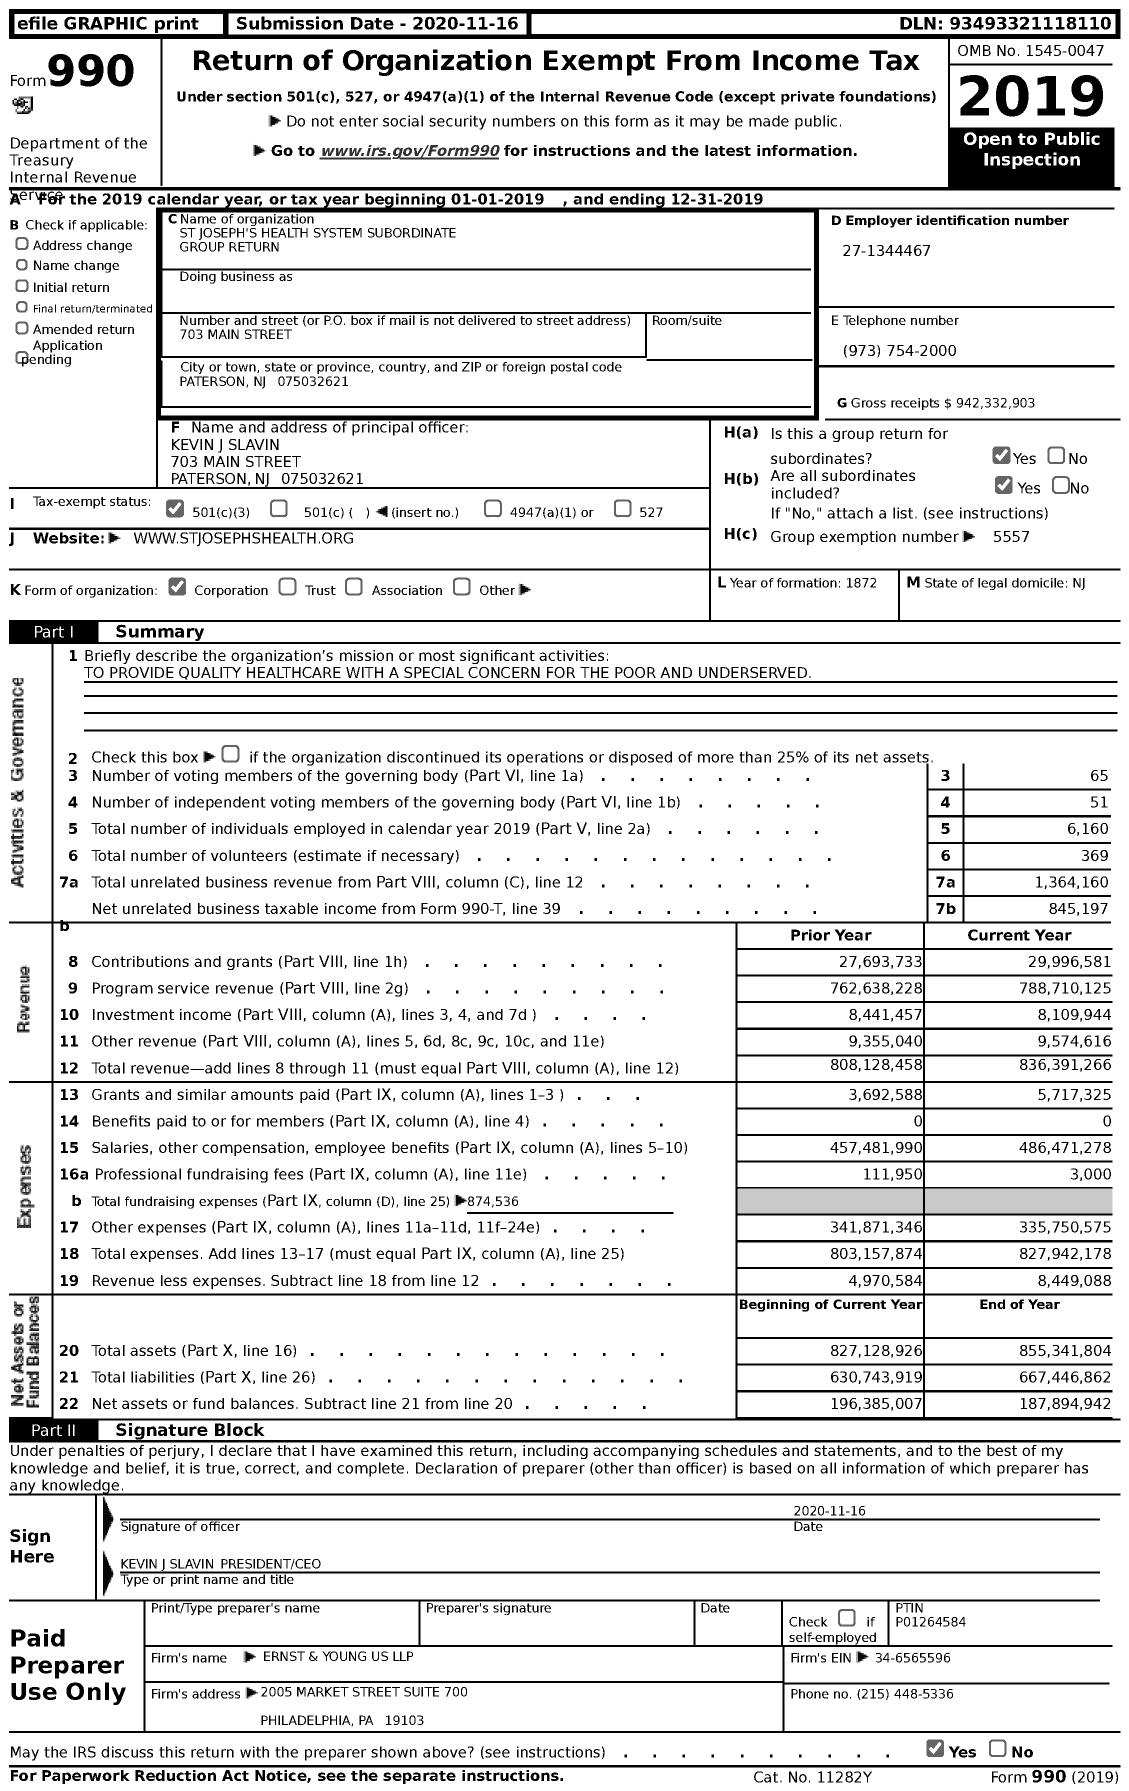 Image of first page of 2019 Form 990 for St Joseph's Health System Subordinate Group Return